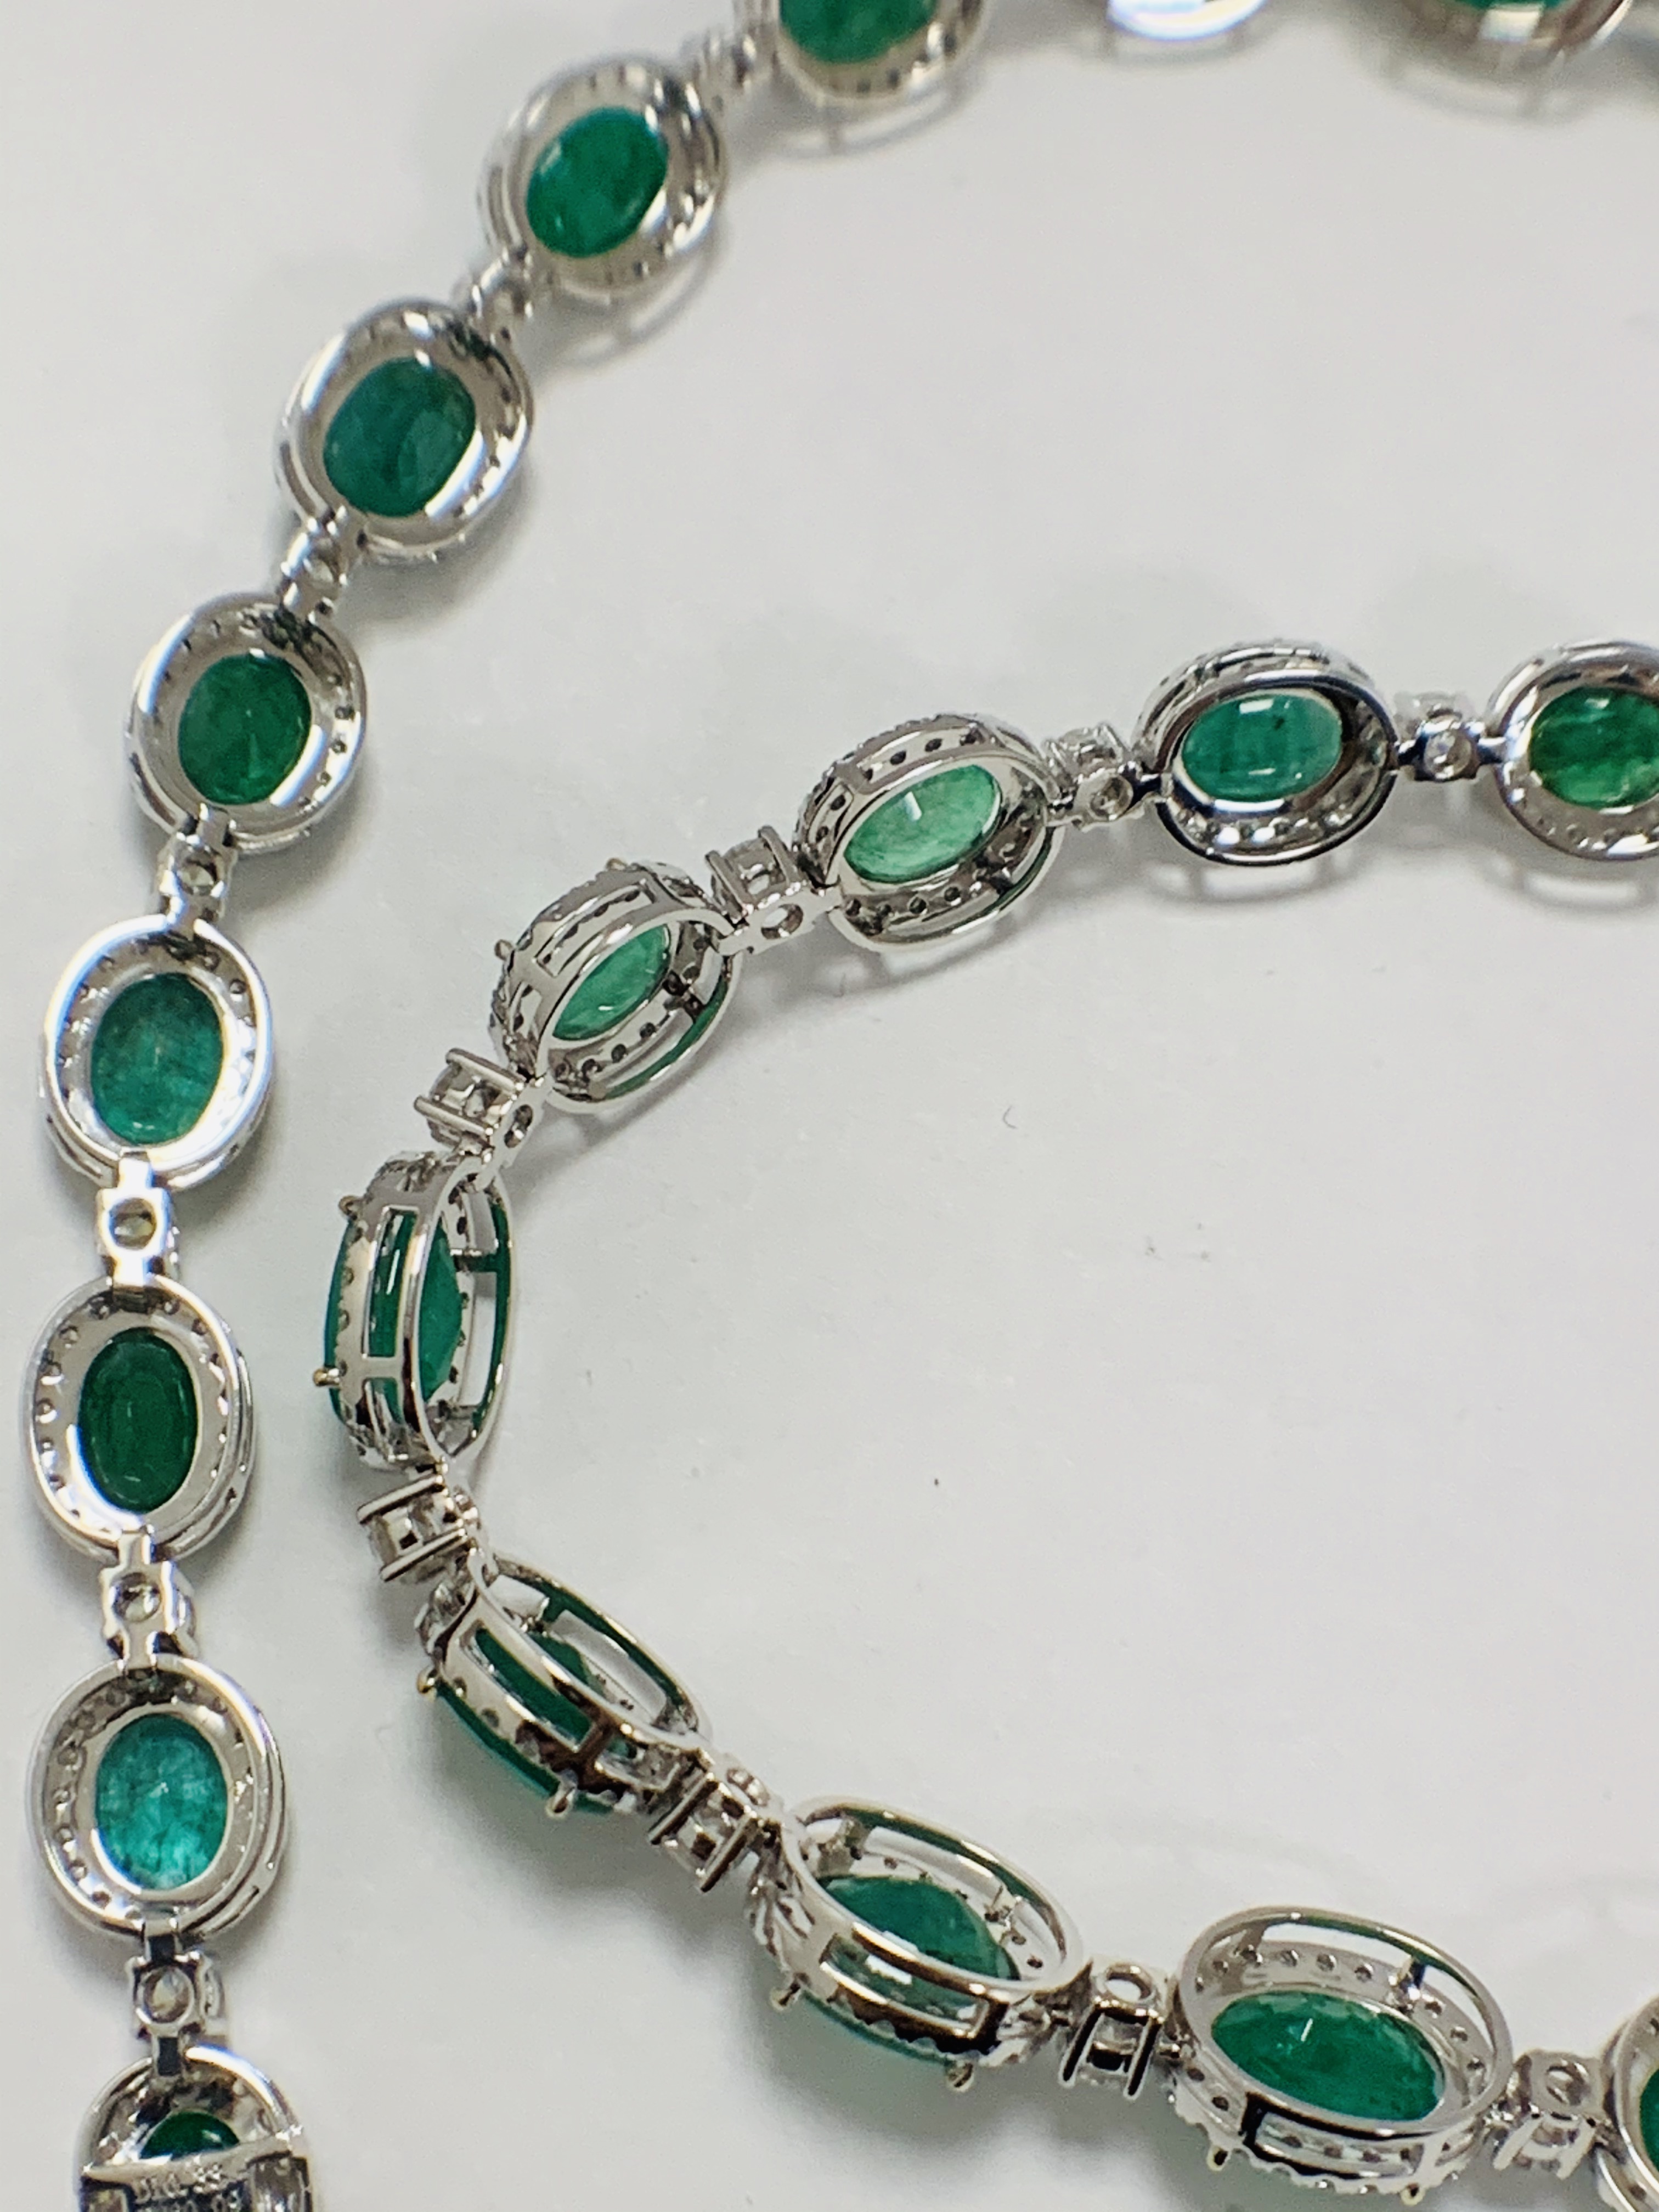 Platinum and Yellow Gold Emerald and Diamond necklace featuring, 29 oval cut, light to deep green Em - Image 15 of 36